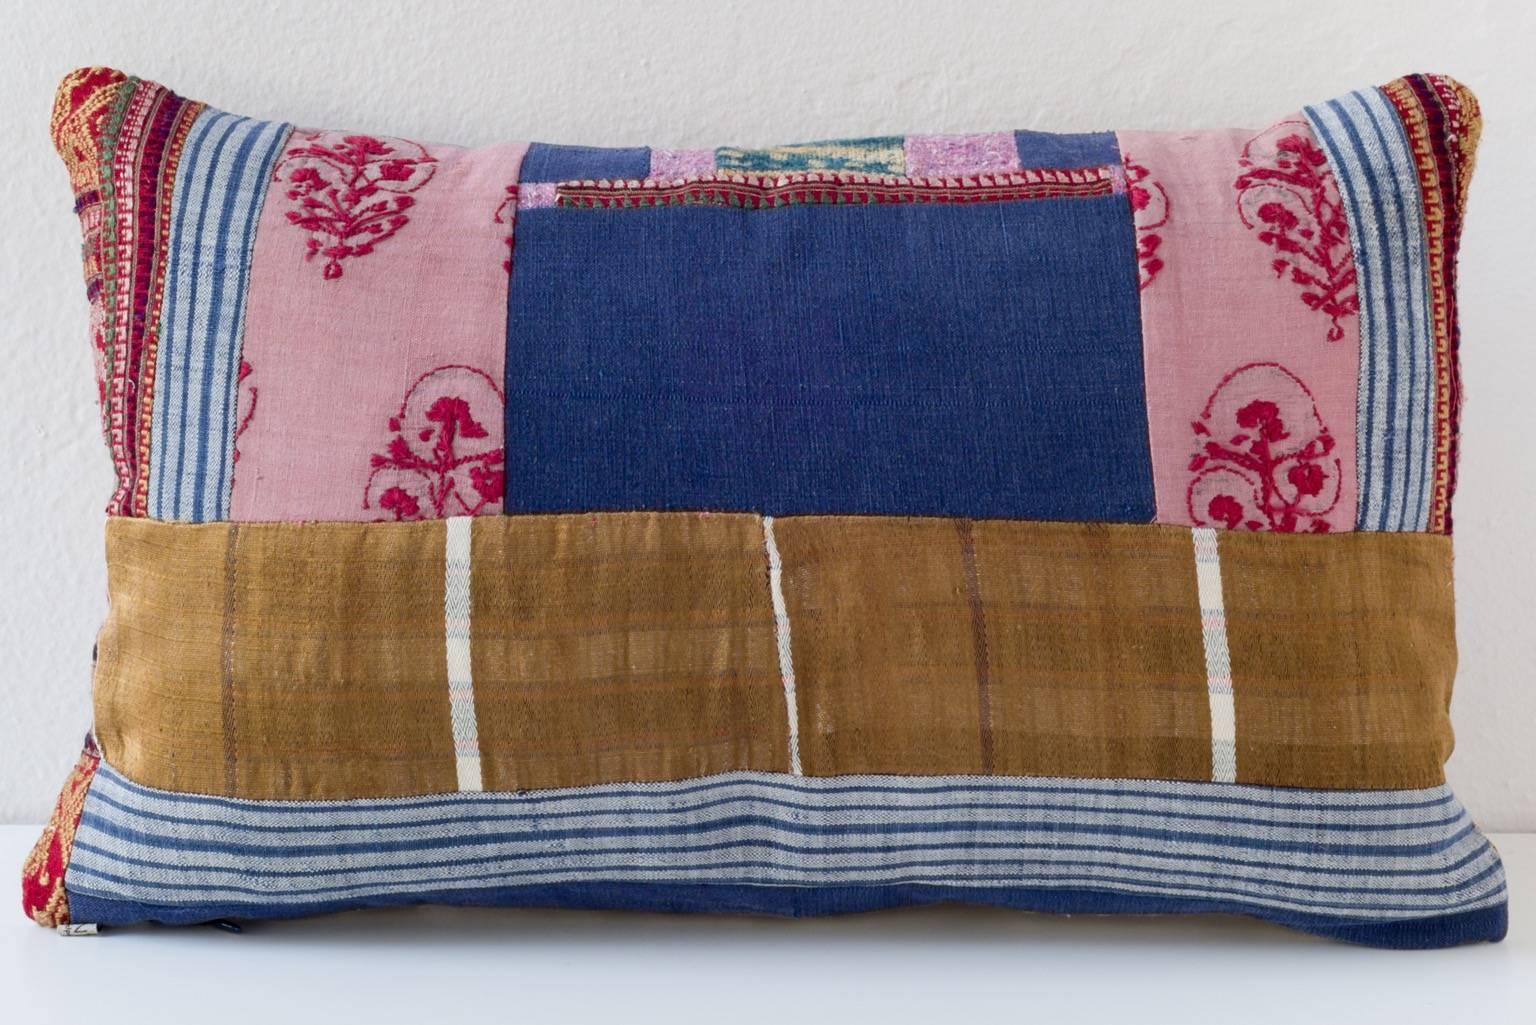 A central panel of indigo futon cover from Shandong or Hebei province with a Huang Ping County woven silk scarf. Accent of Ndop Cameroon indigo with Laos Tai Daeng textile and Indian dowry needlework. 

- Linen on reverse--see image
- 75/25 goose